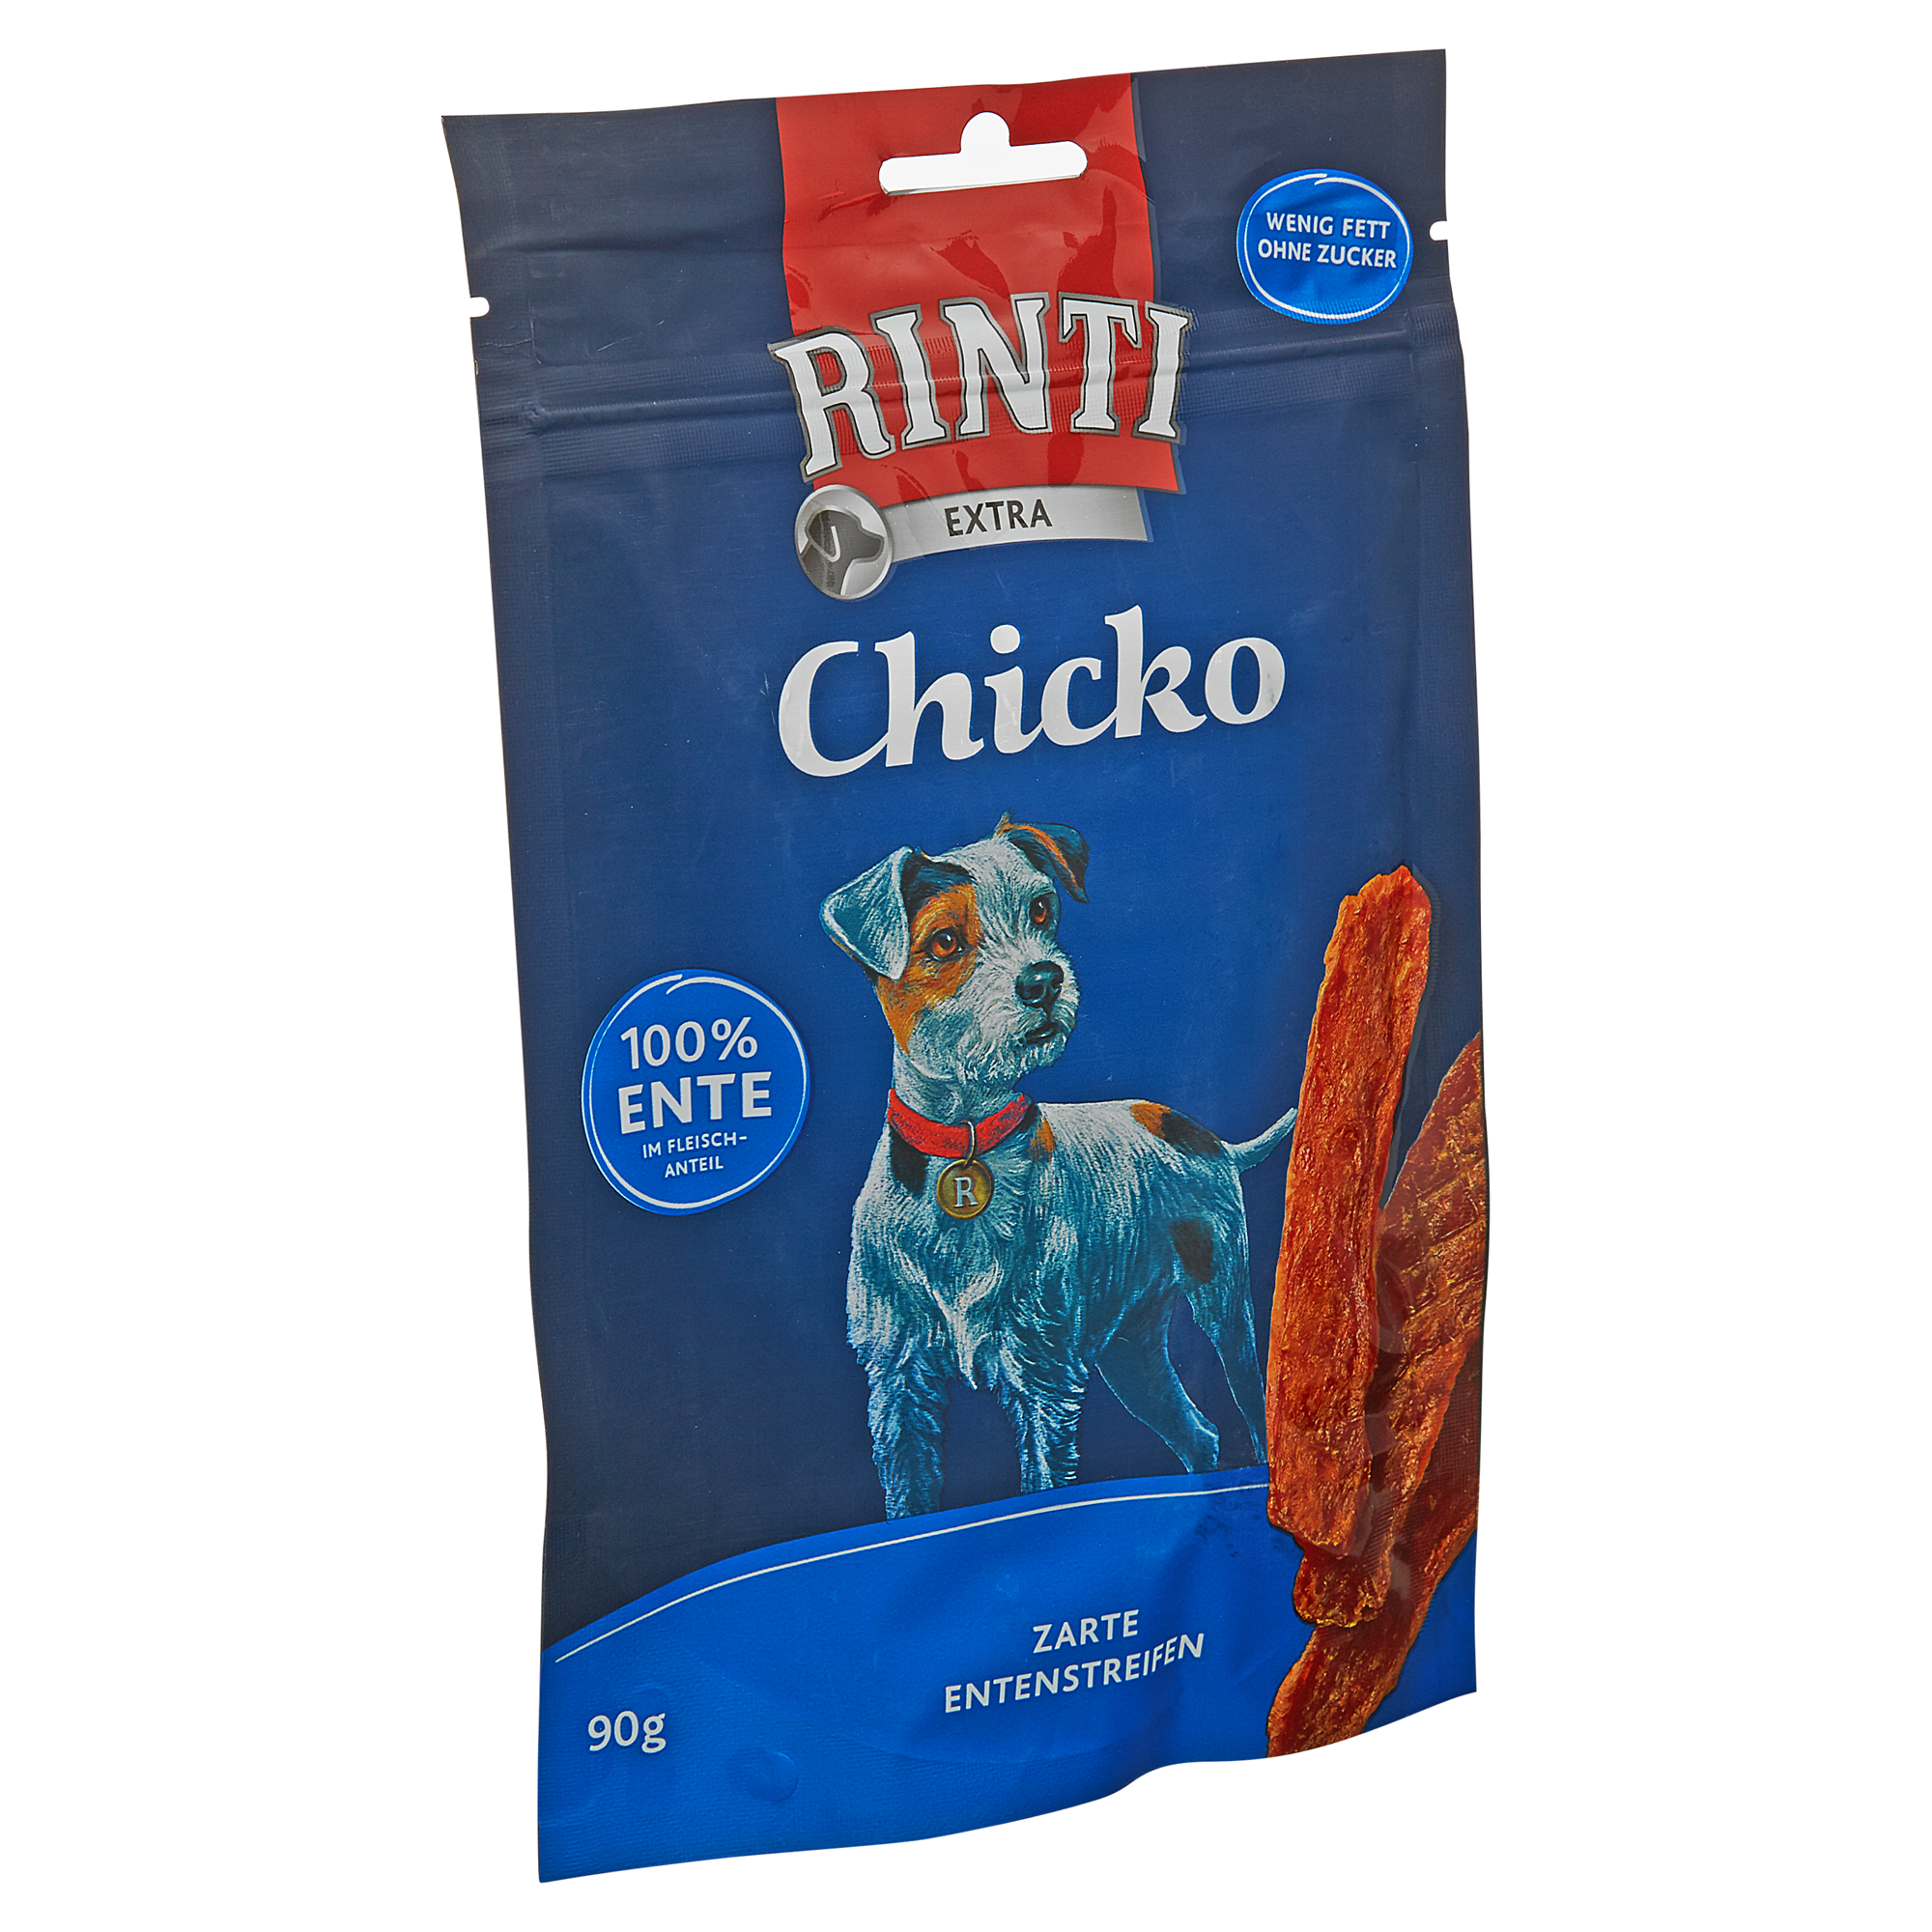 Hundesnack "Chicko" Extra mit Entenstreifen 90 g + product picture